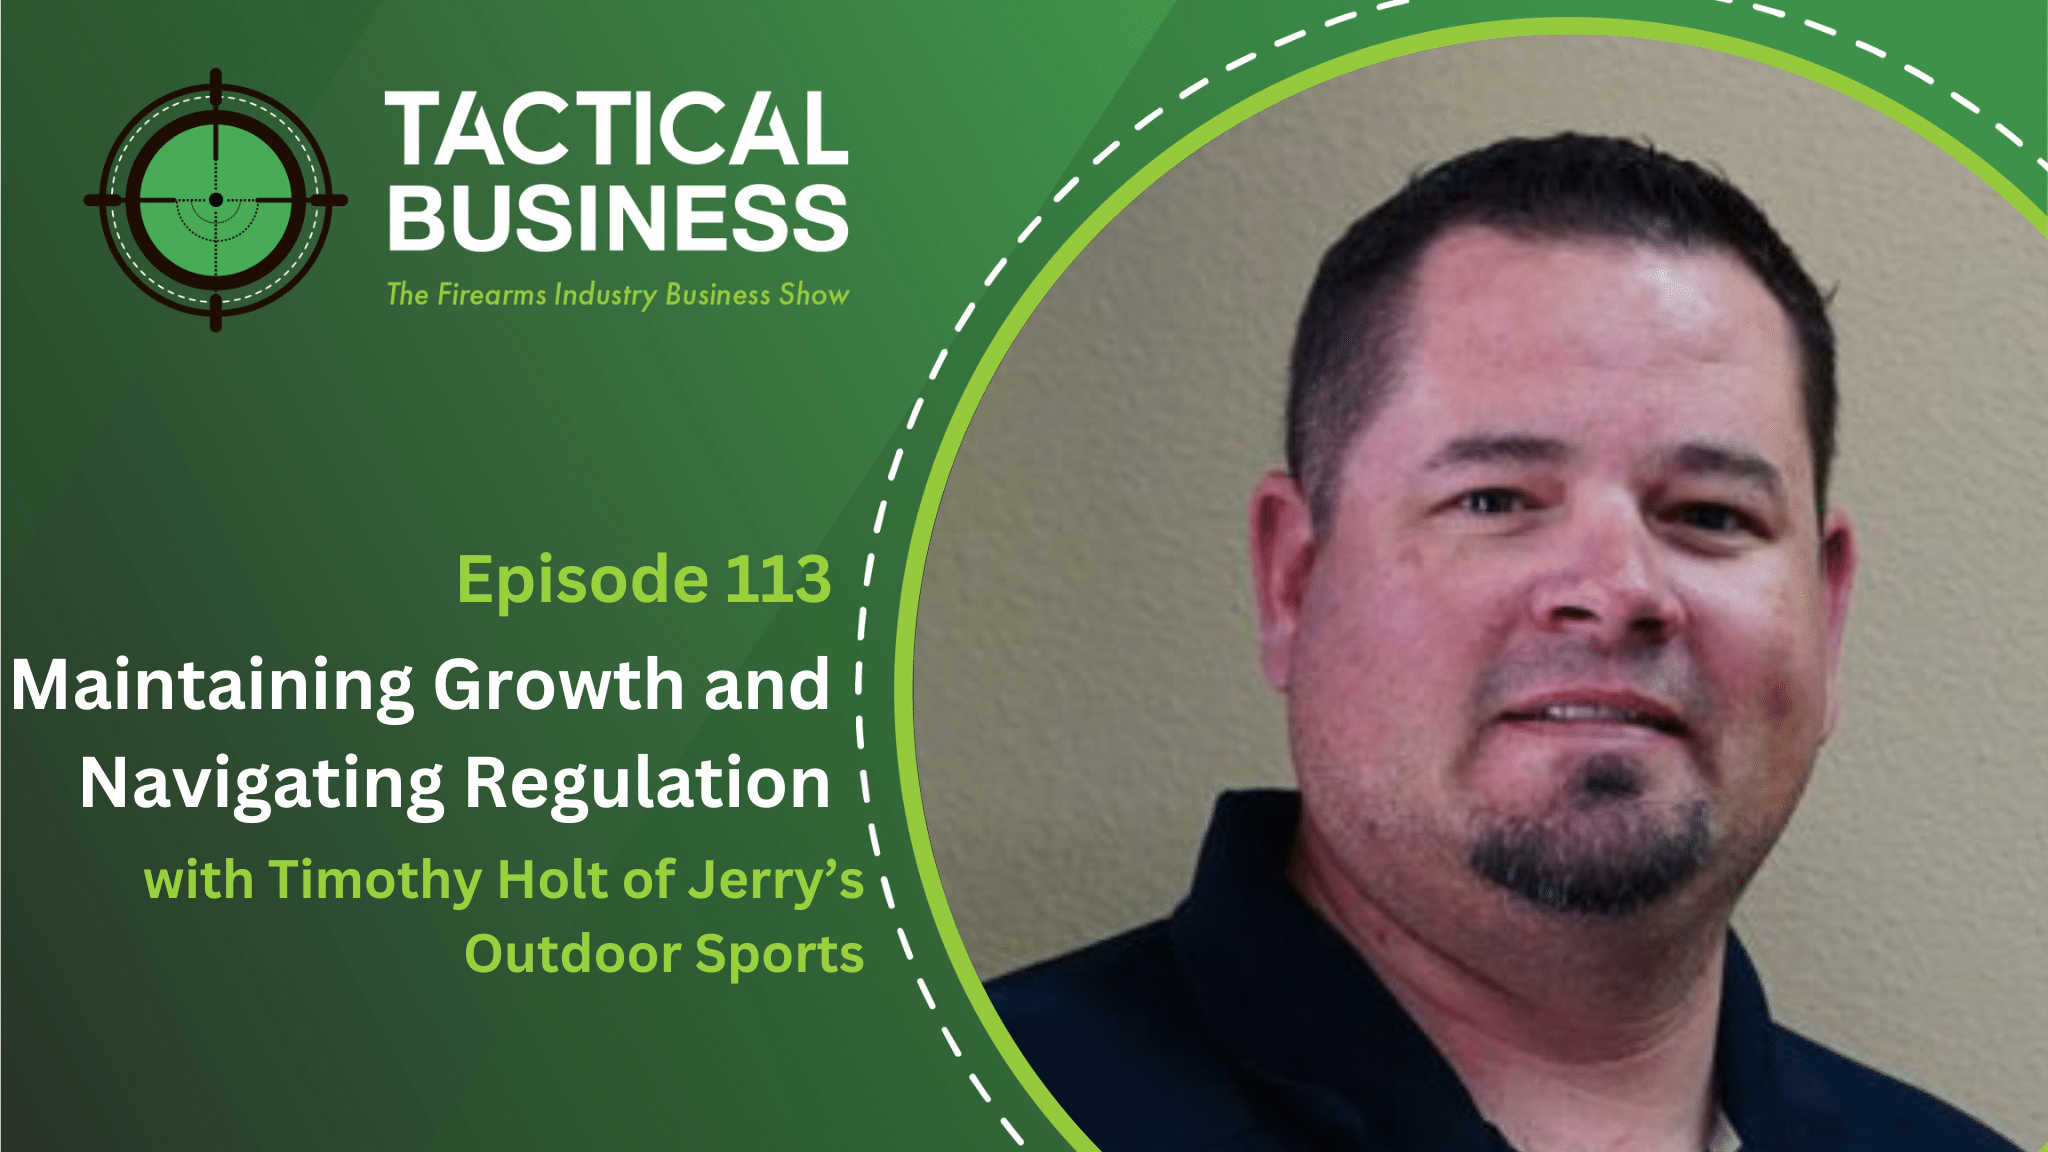 Maintaining Growth and Navigating Regulation with Timothy Holt of Jerry’s Outdoor Sports